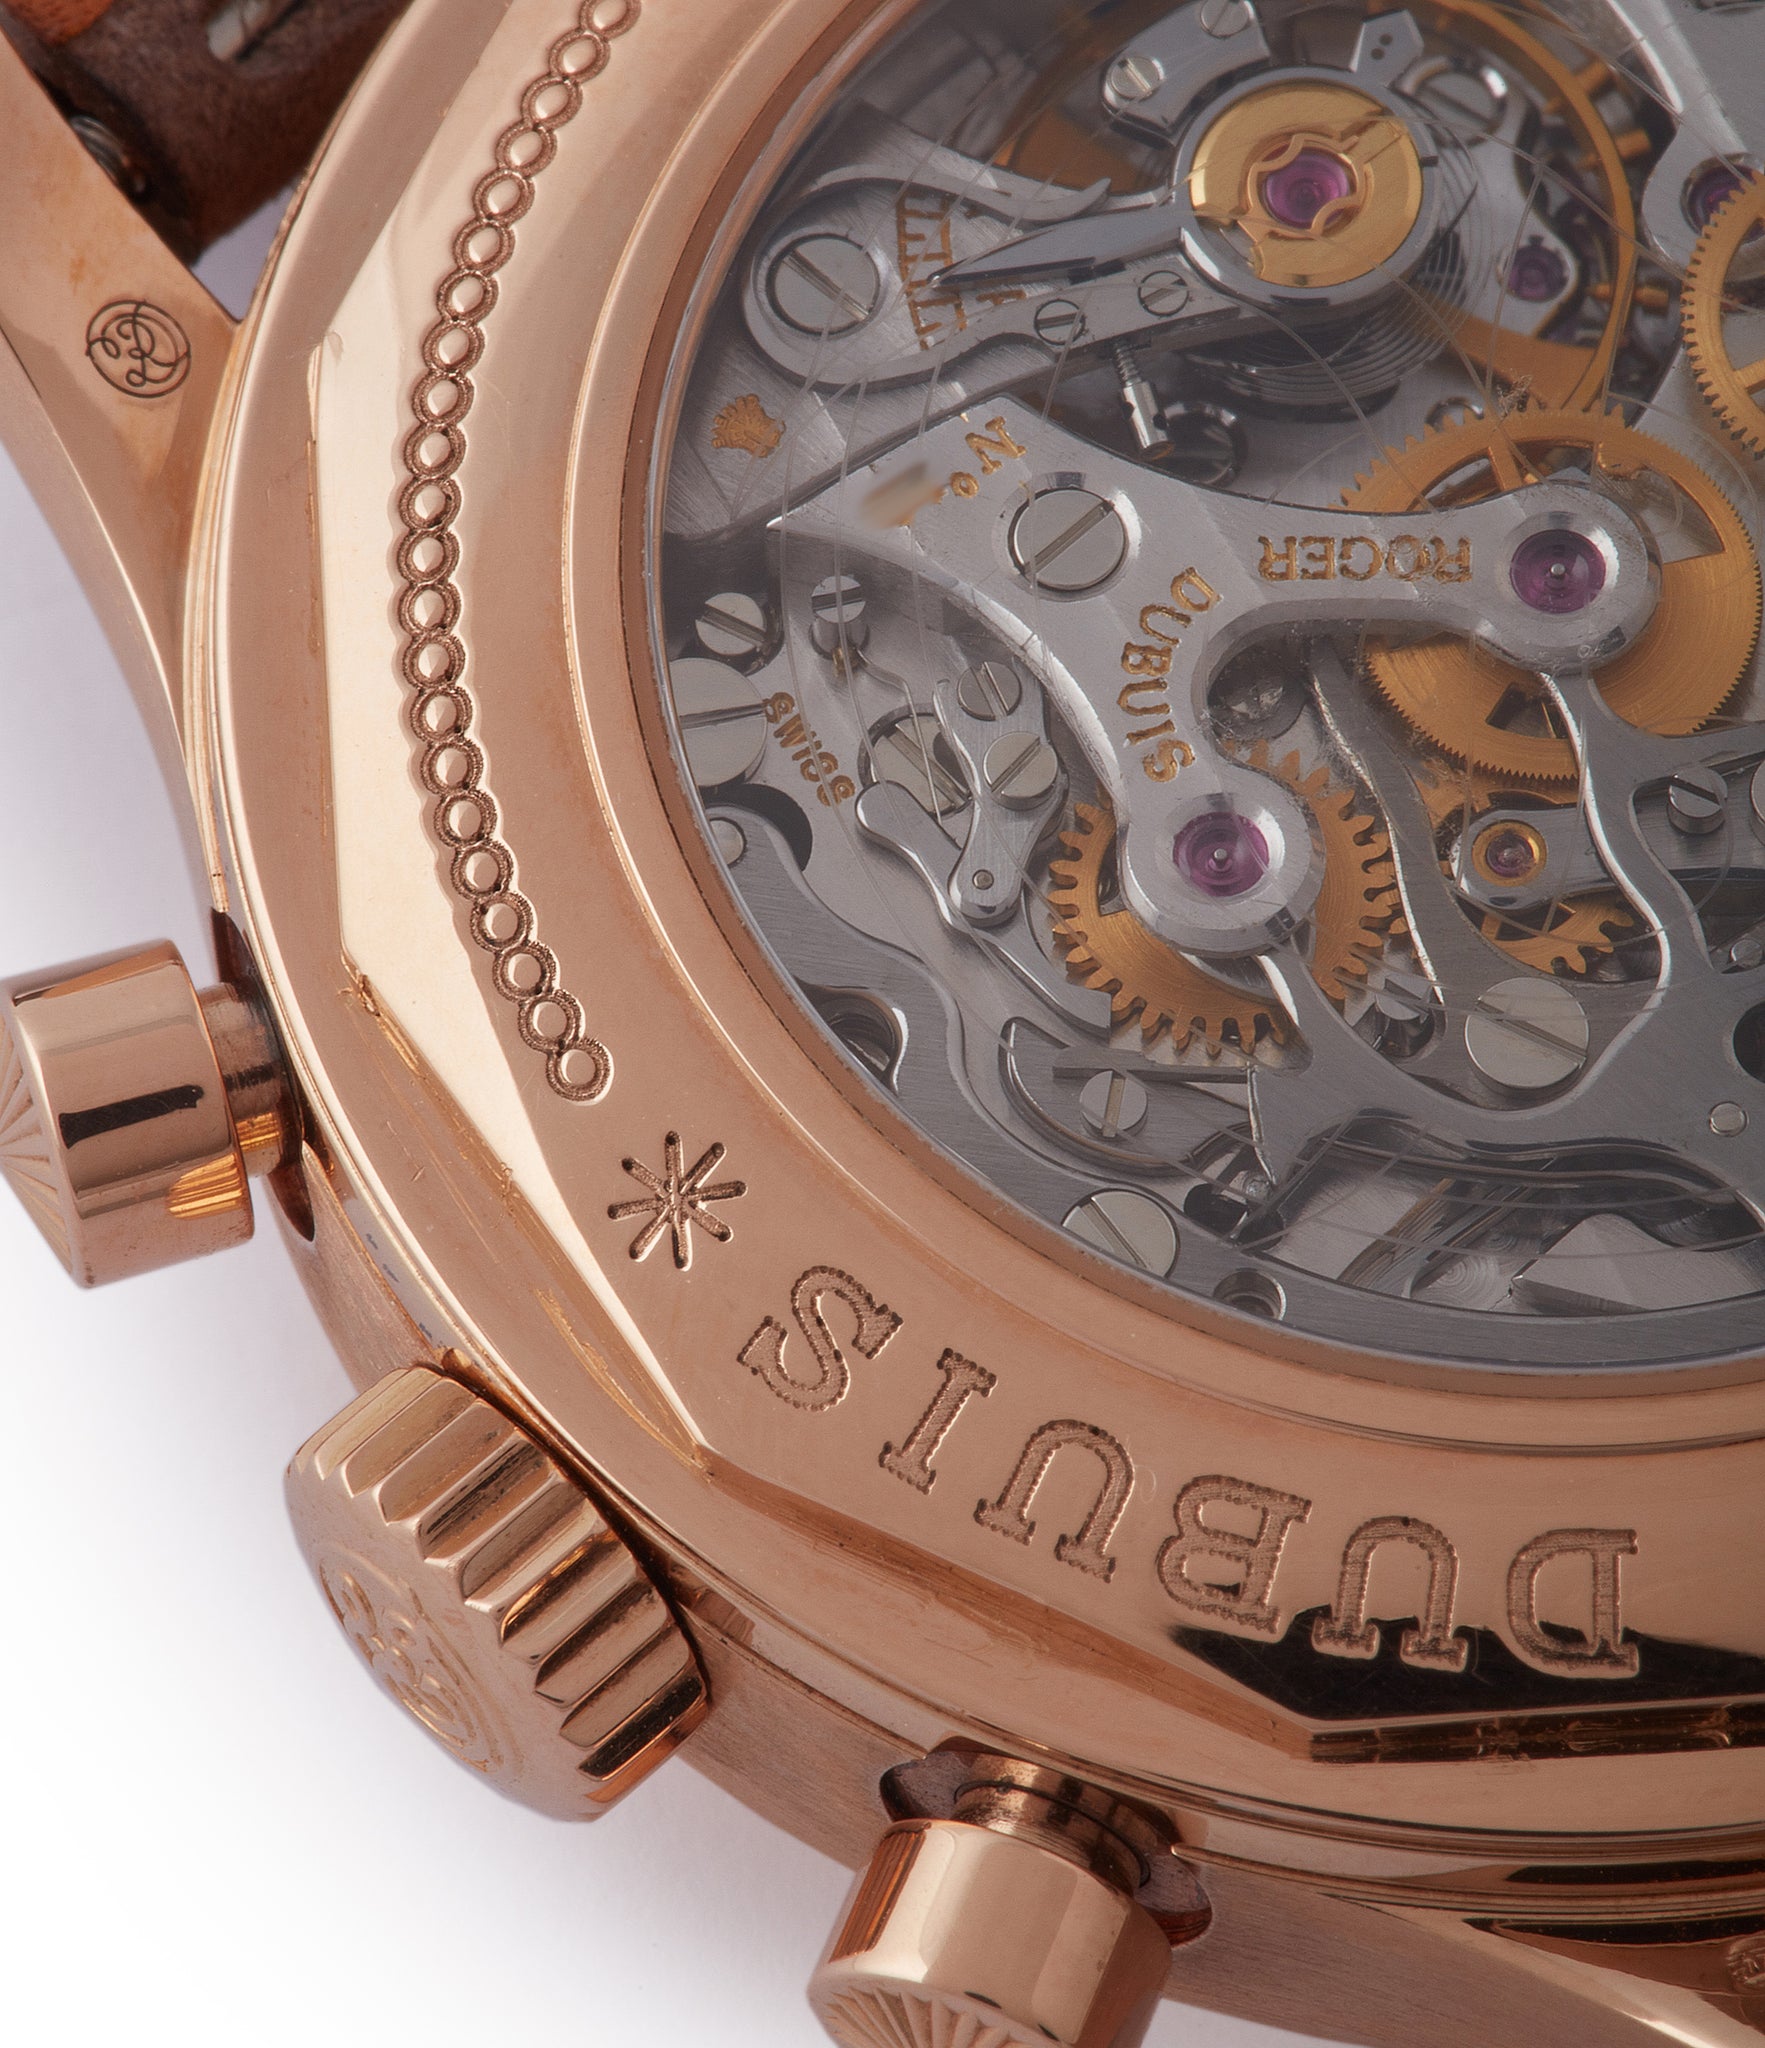 RD5630 Roger Dubuis Hommage bi-retrograde Chronograph H40 560 limited edition rare rose gold lacquer dial watch for sale online at A Collected Man London UK specialist of rare watches